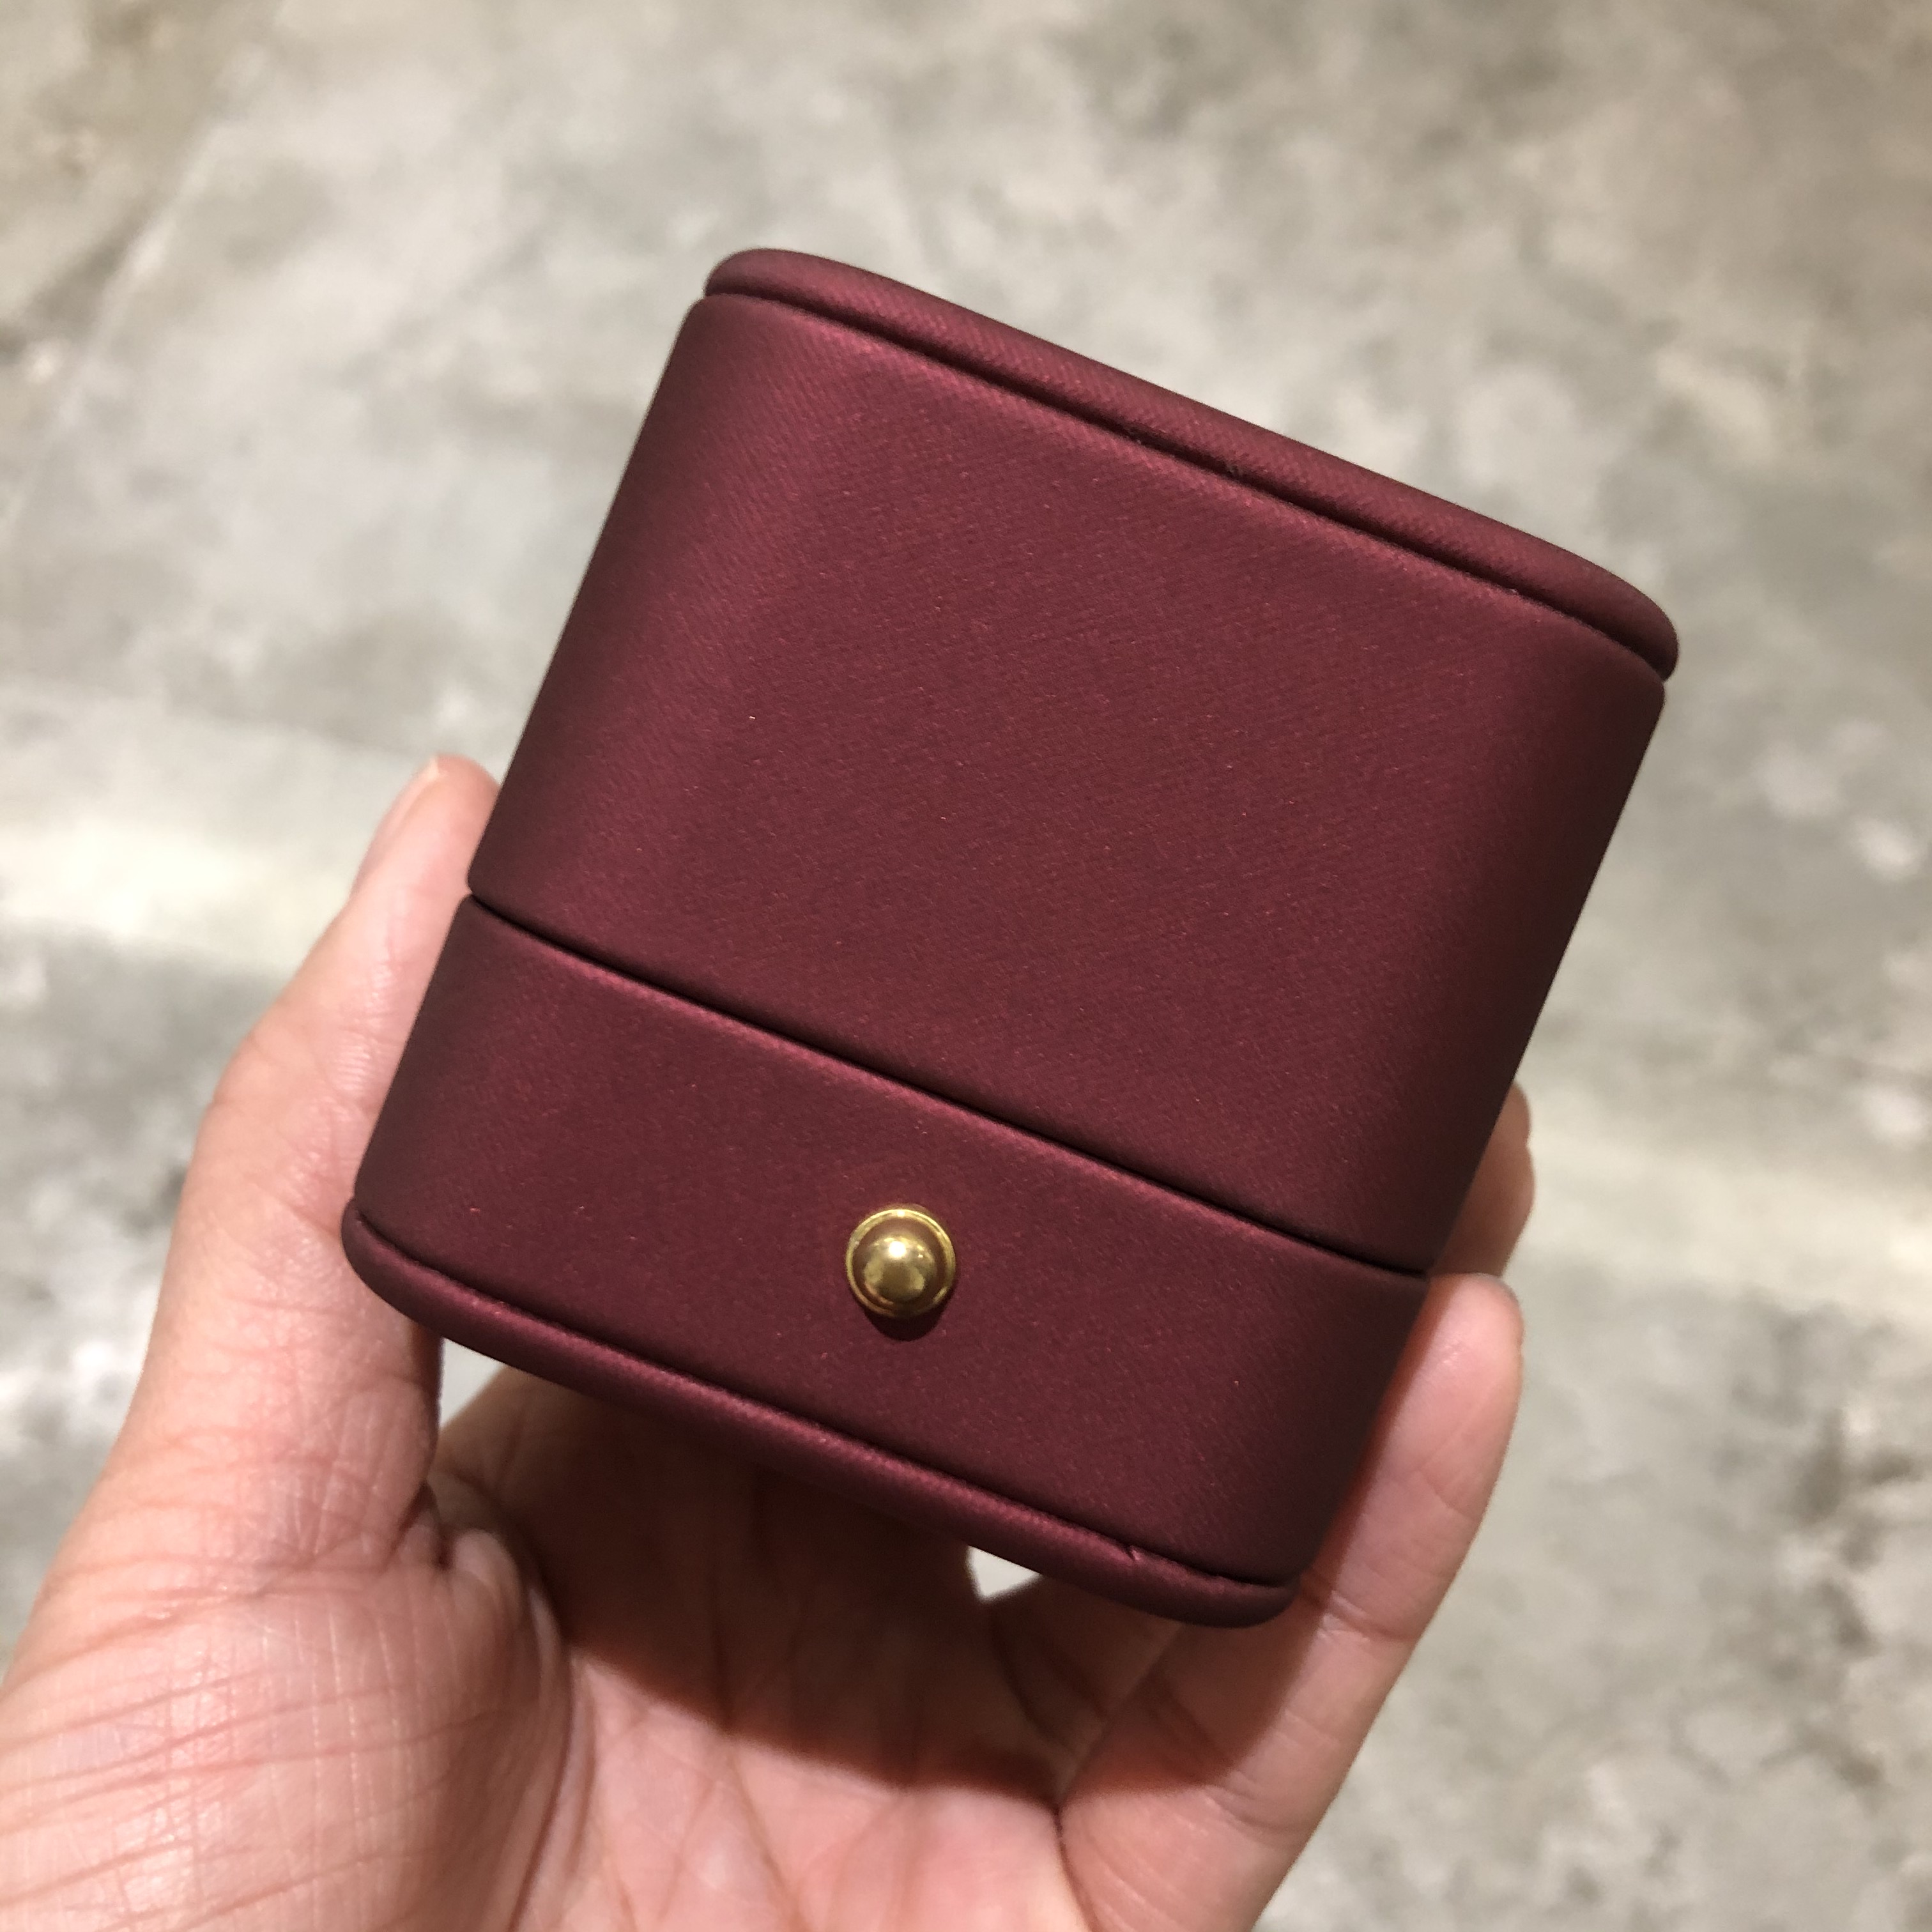 Yadao luxury plastic packaging box velvet insert ring slot box in customized red PU finished